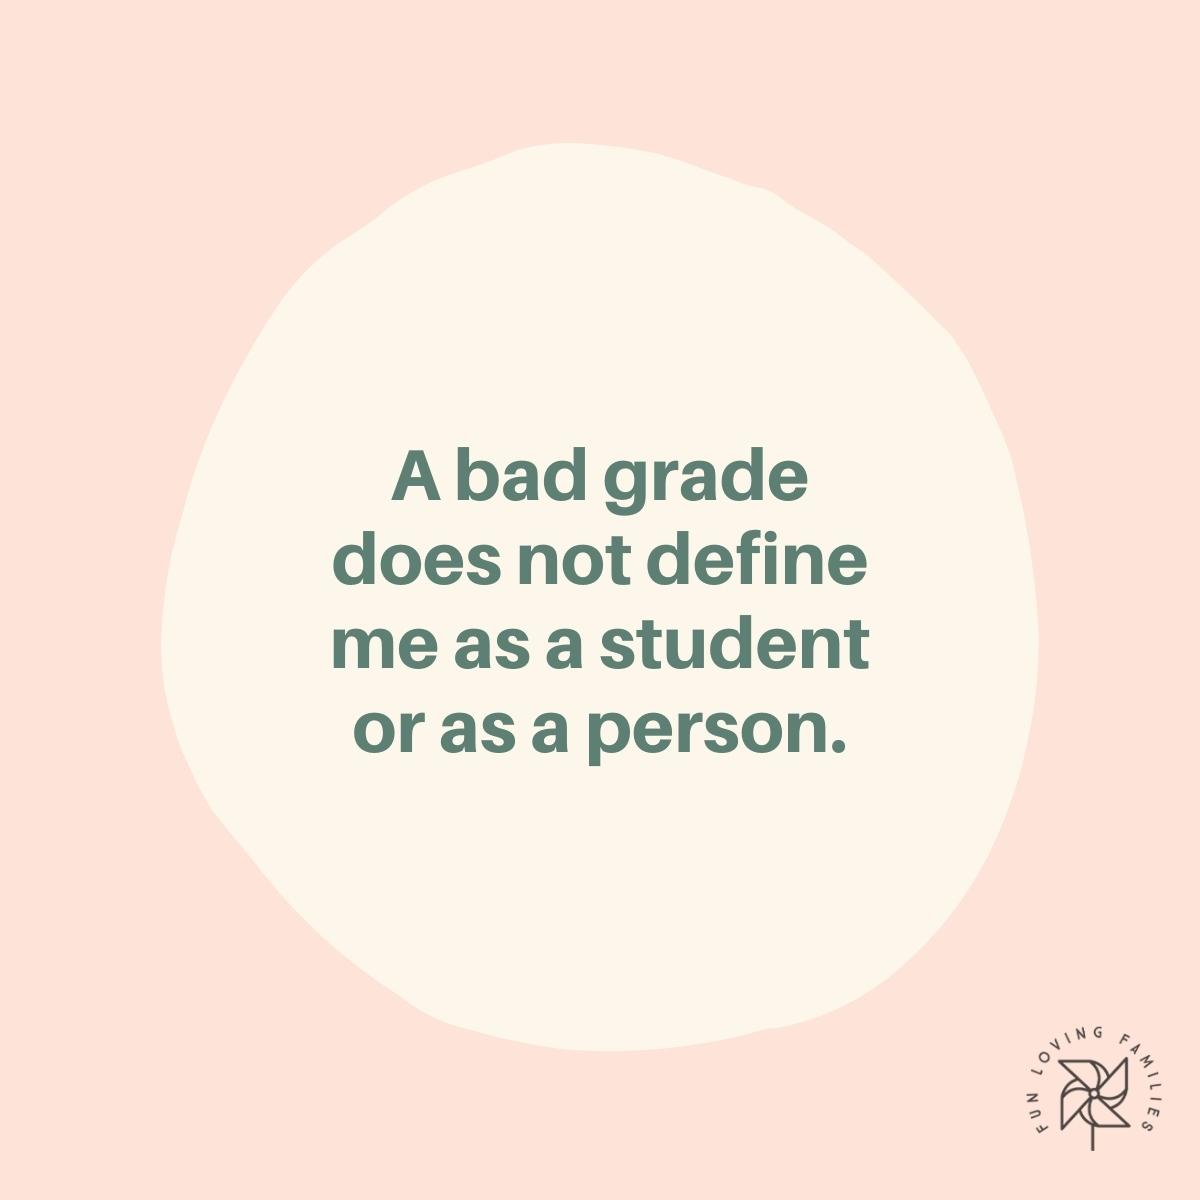 A bad grade does not define me as a student or as a person affirmation